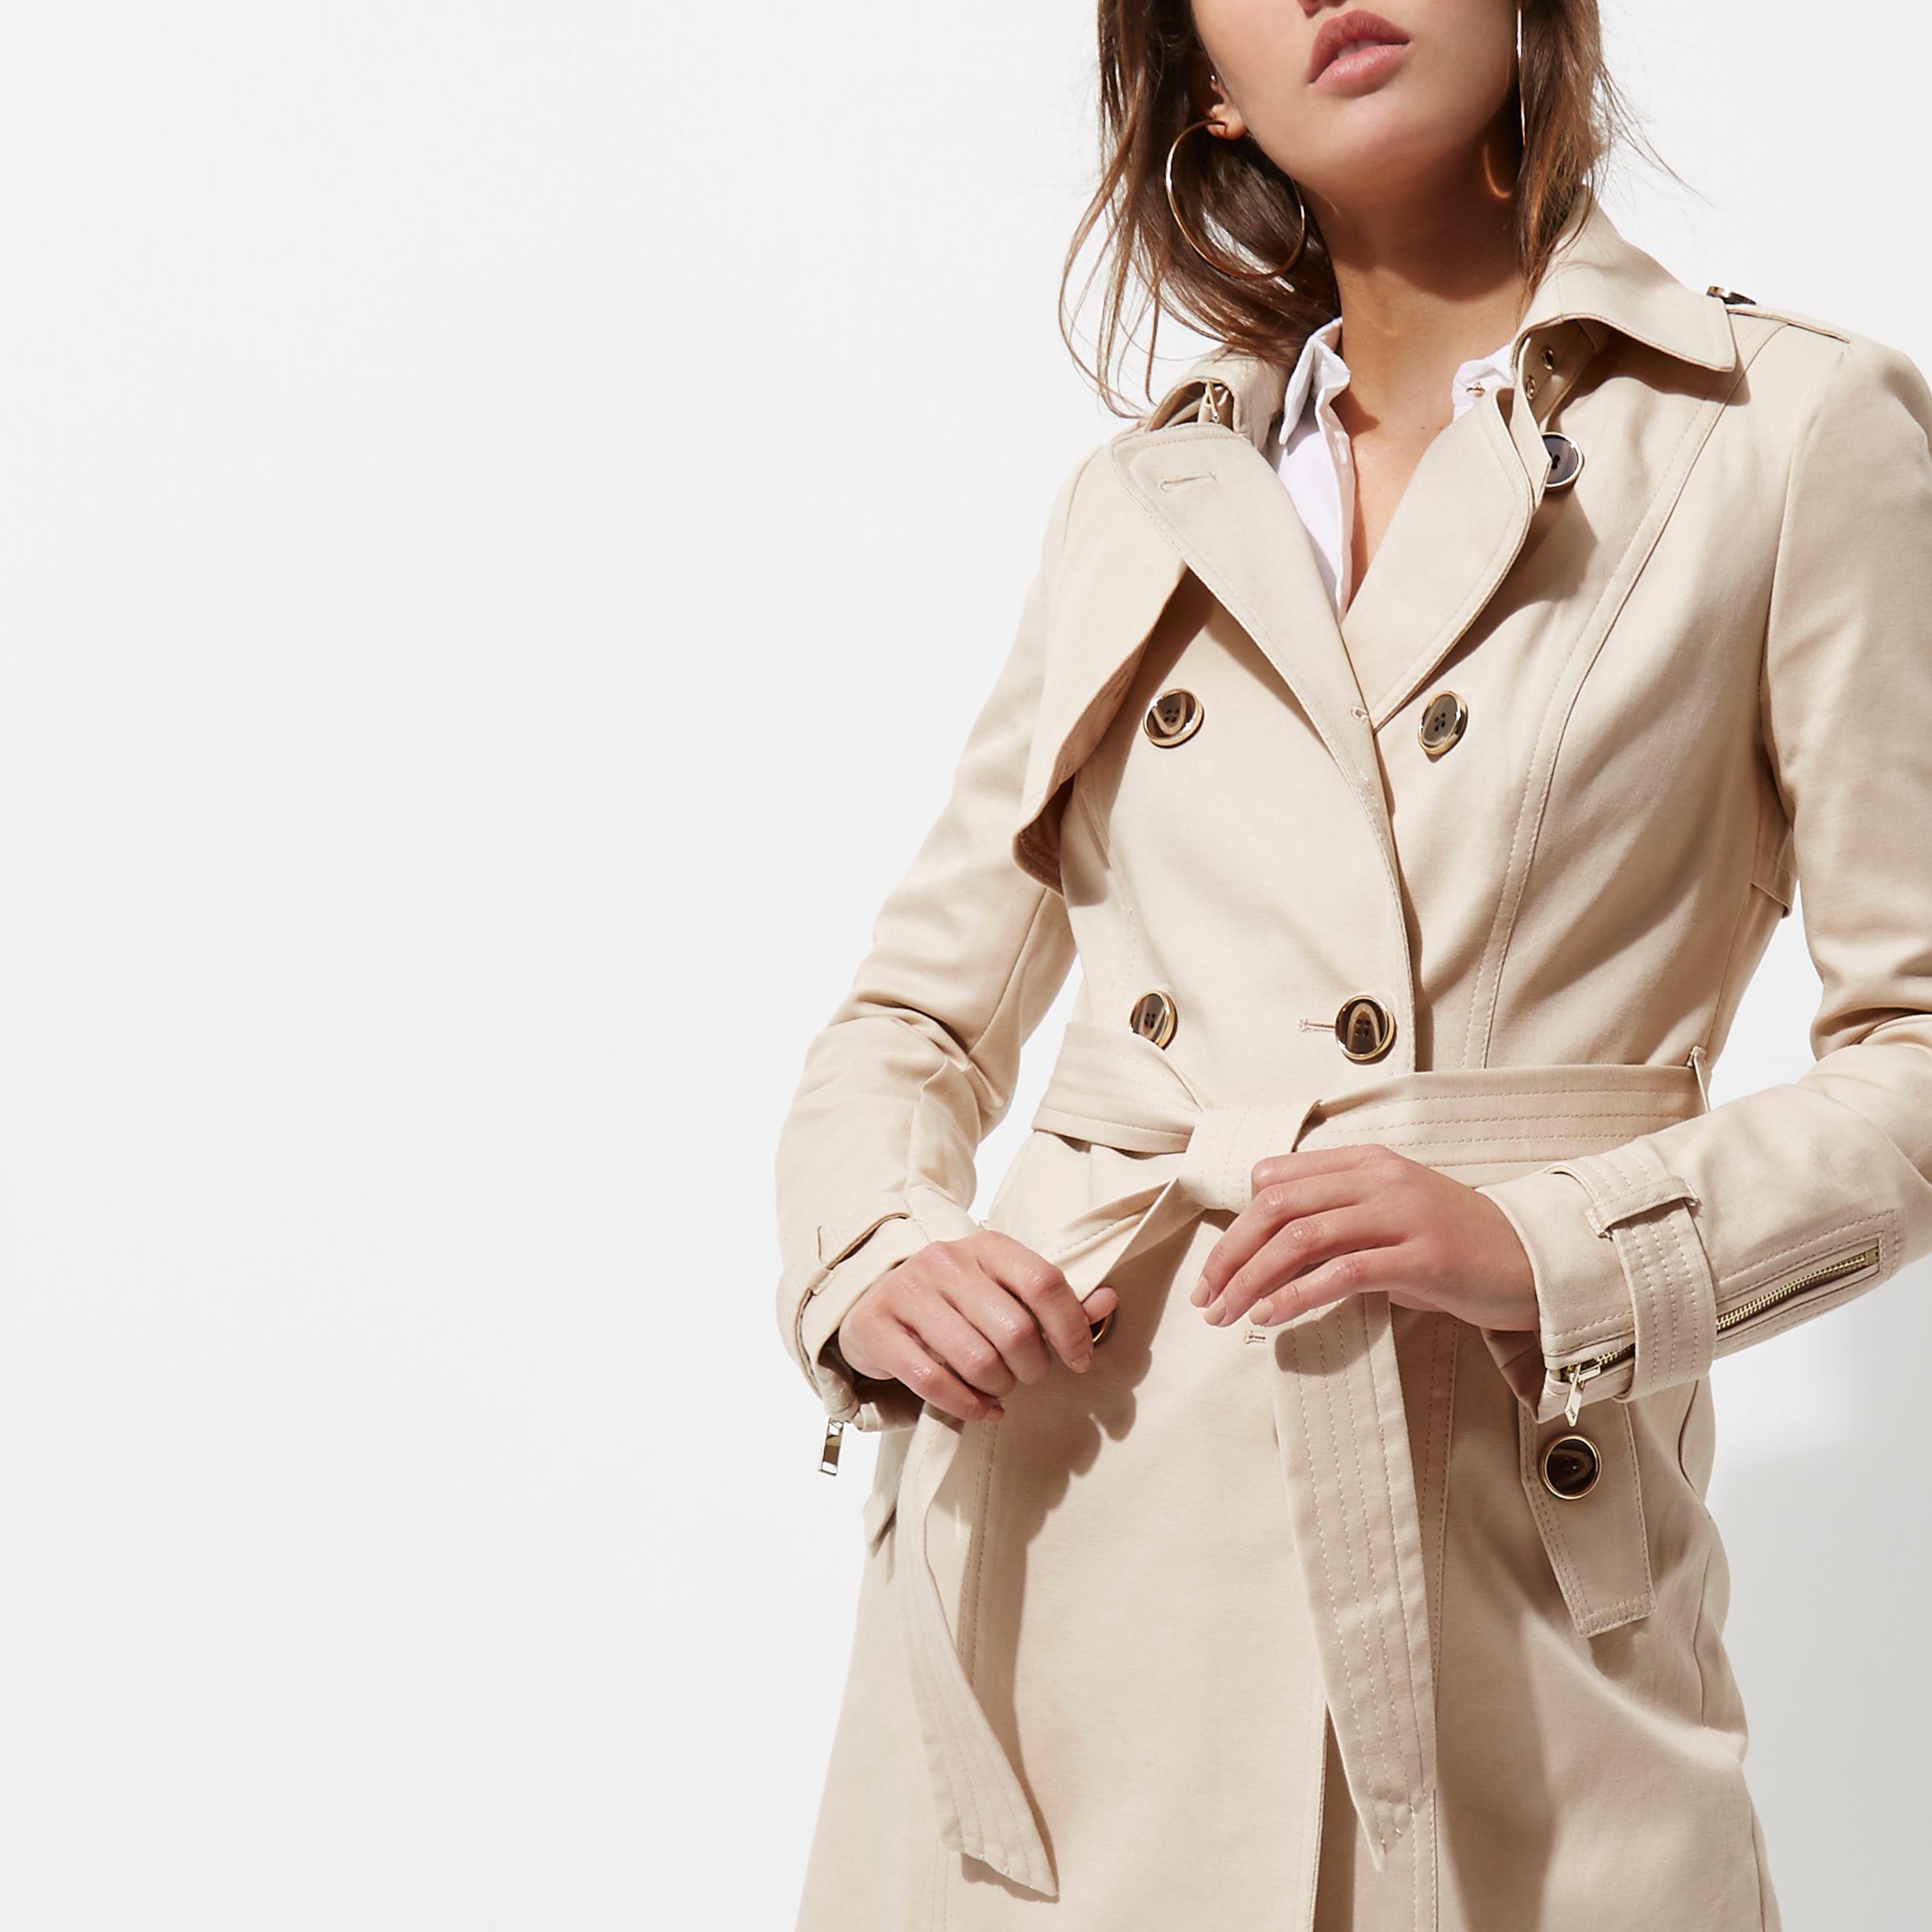 River Island Light Beige Belted Trench Coat in Natural | Lyst